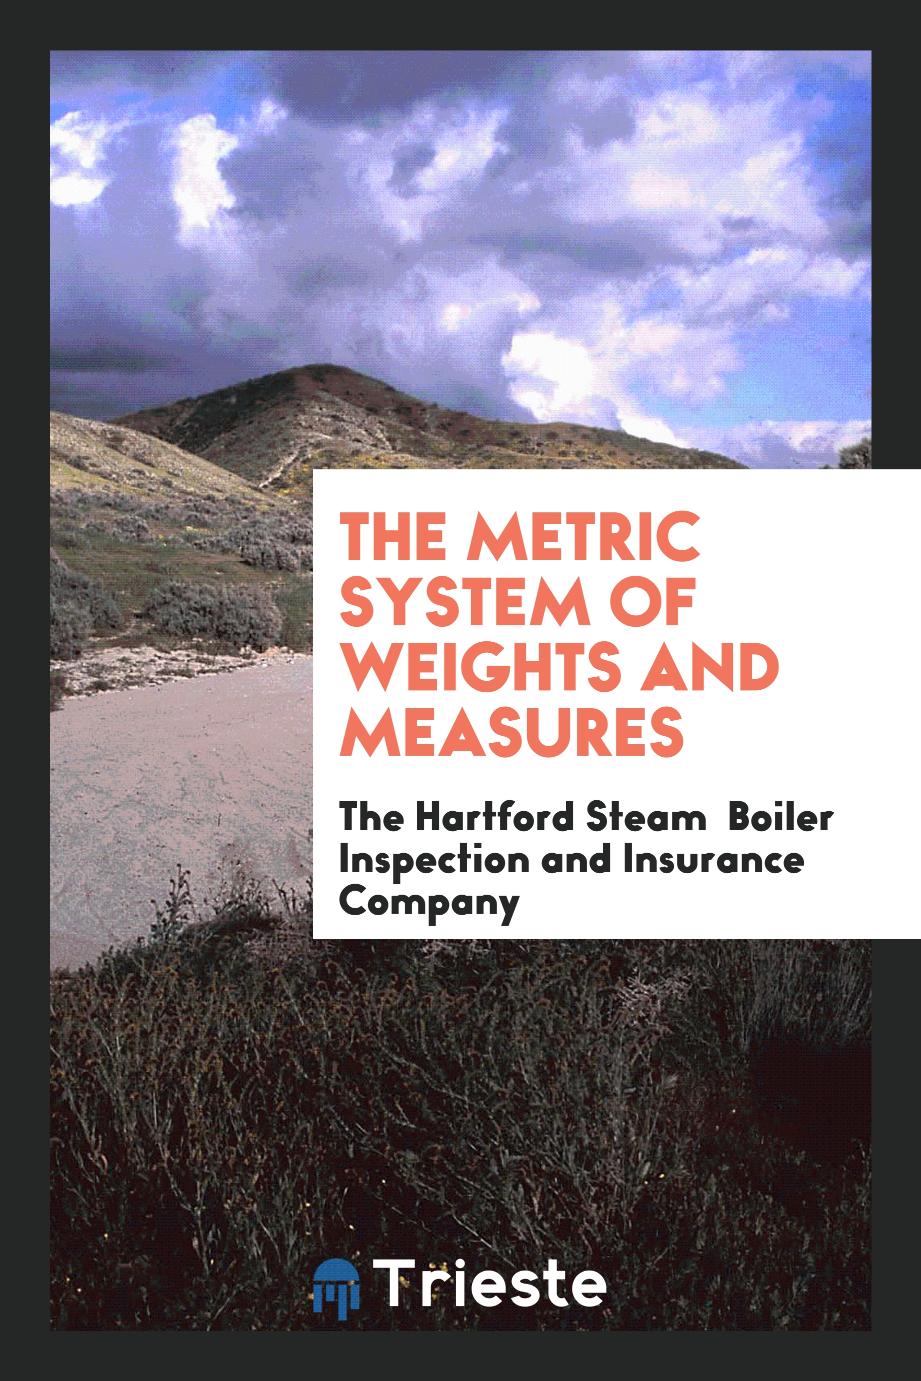 The metric system of weights and measures